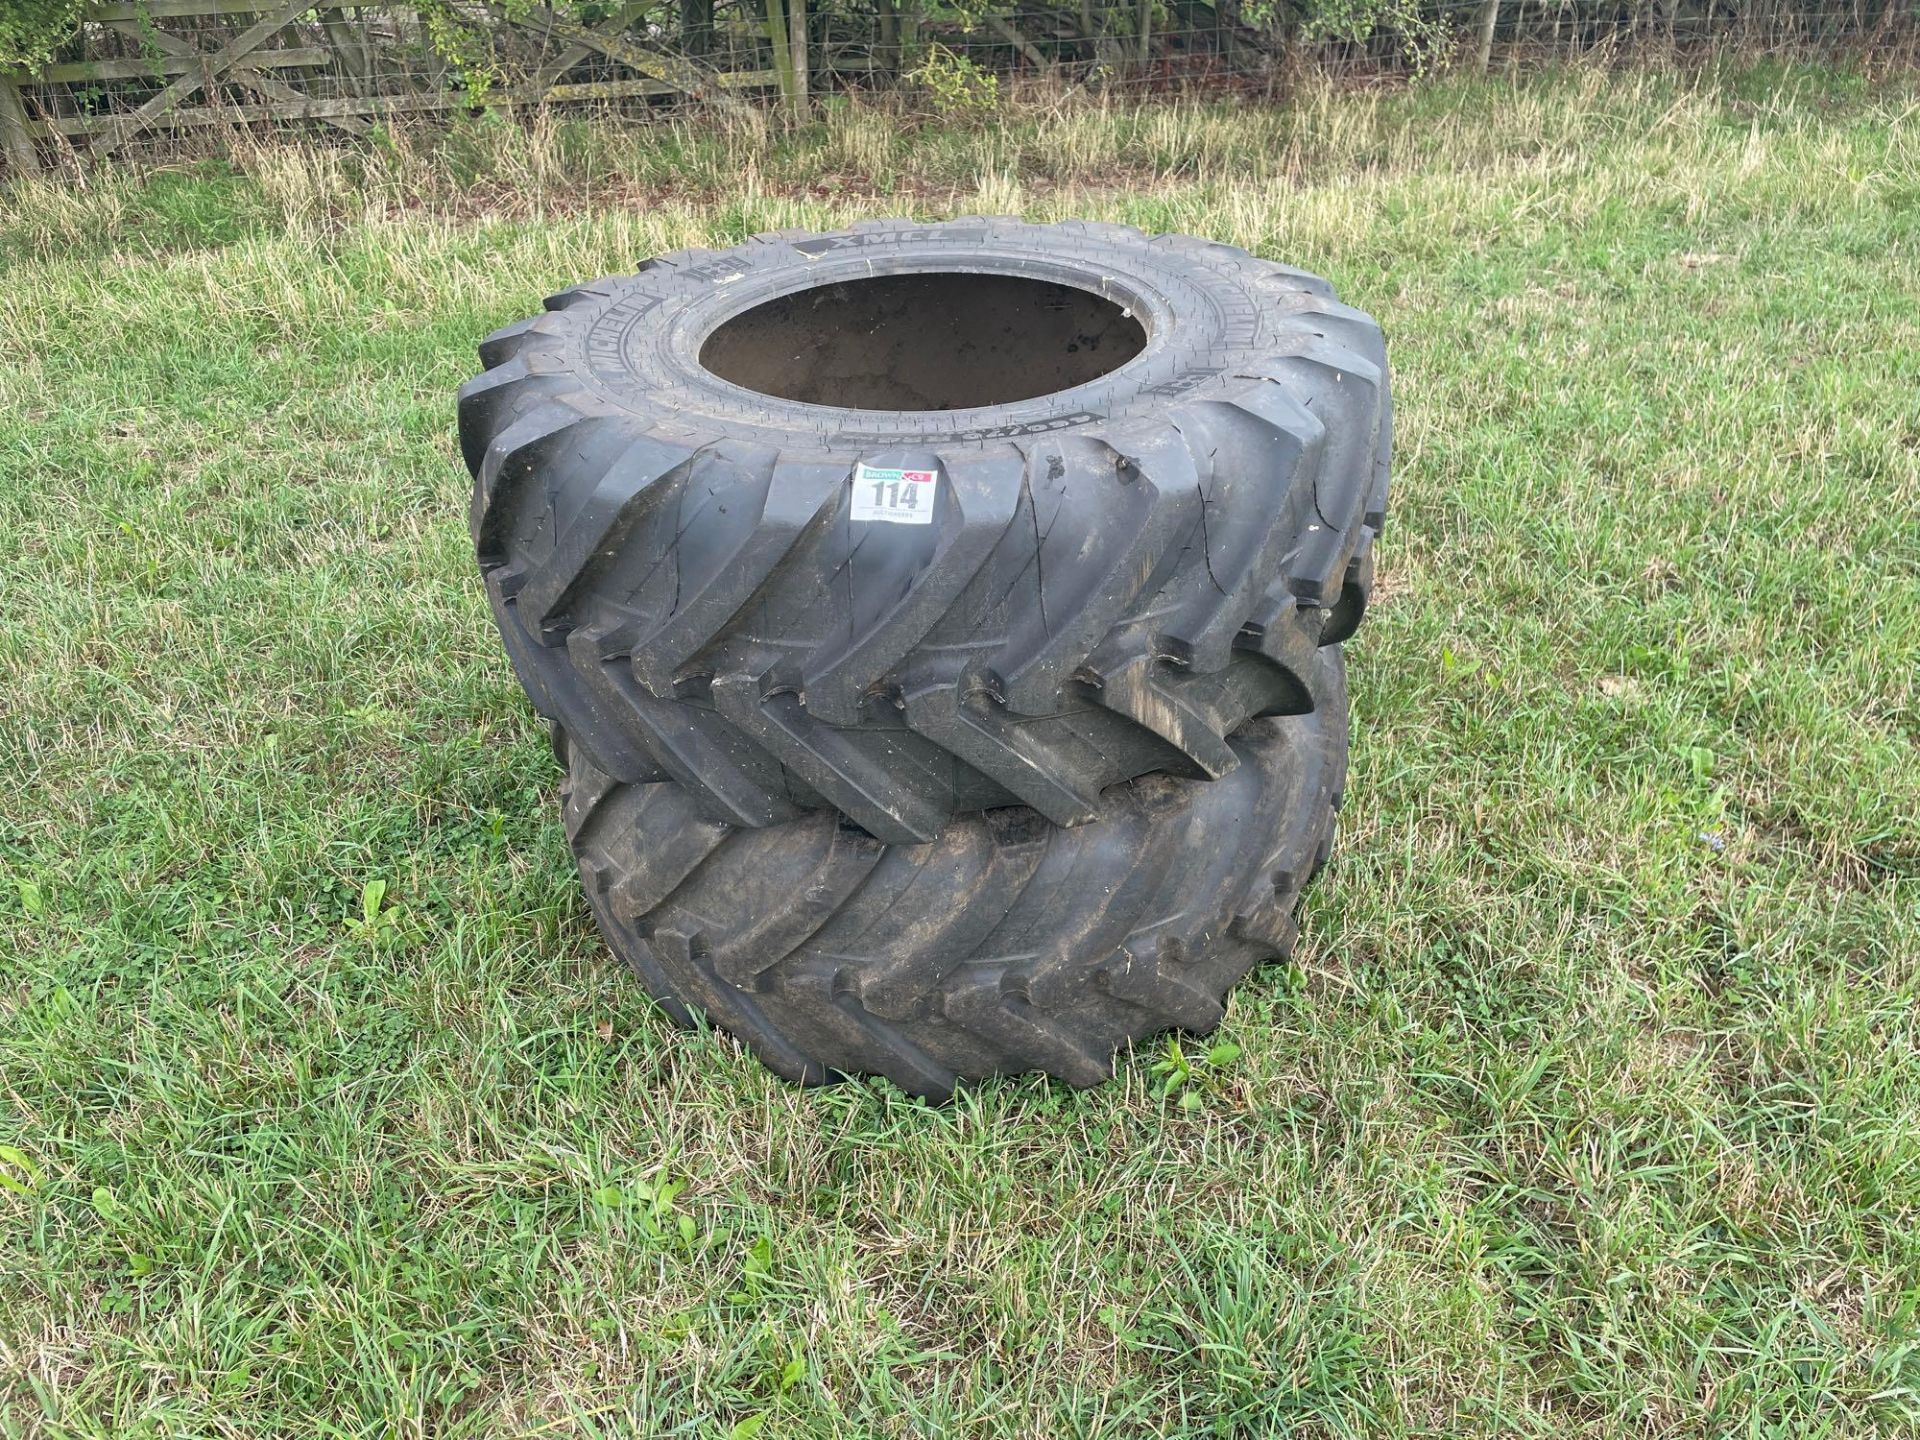 2No Michelin 460/70R24 tyres (repaired)